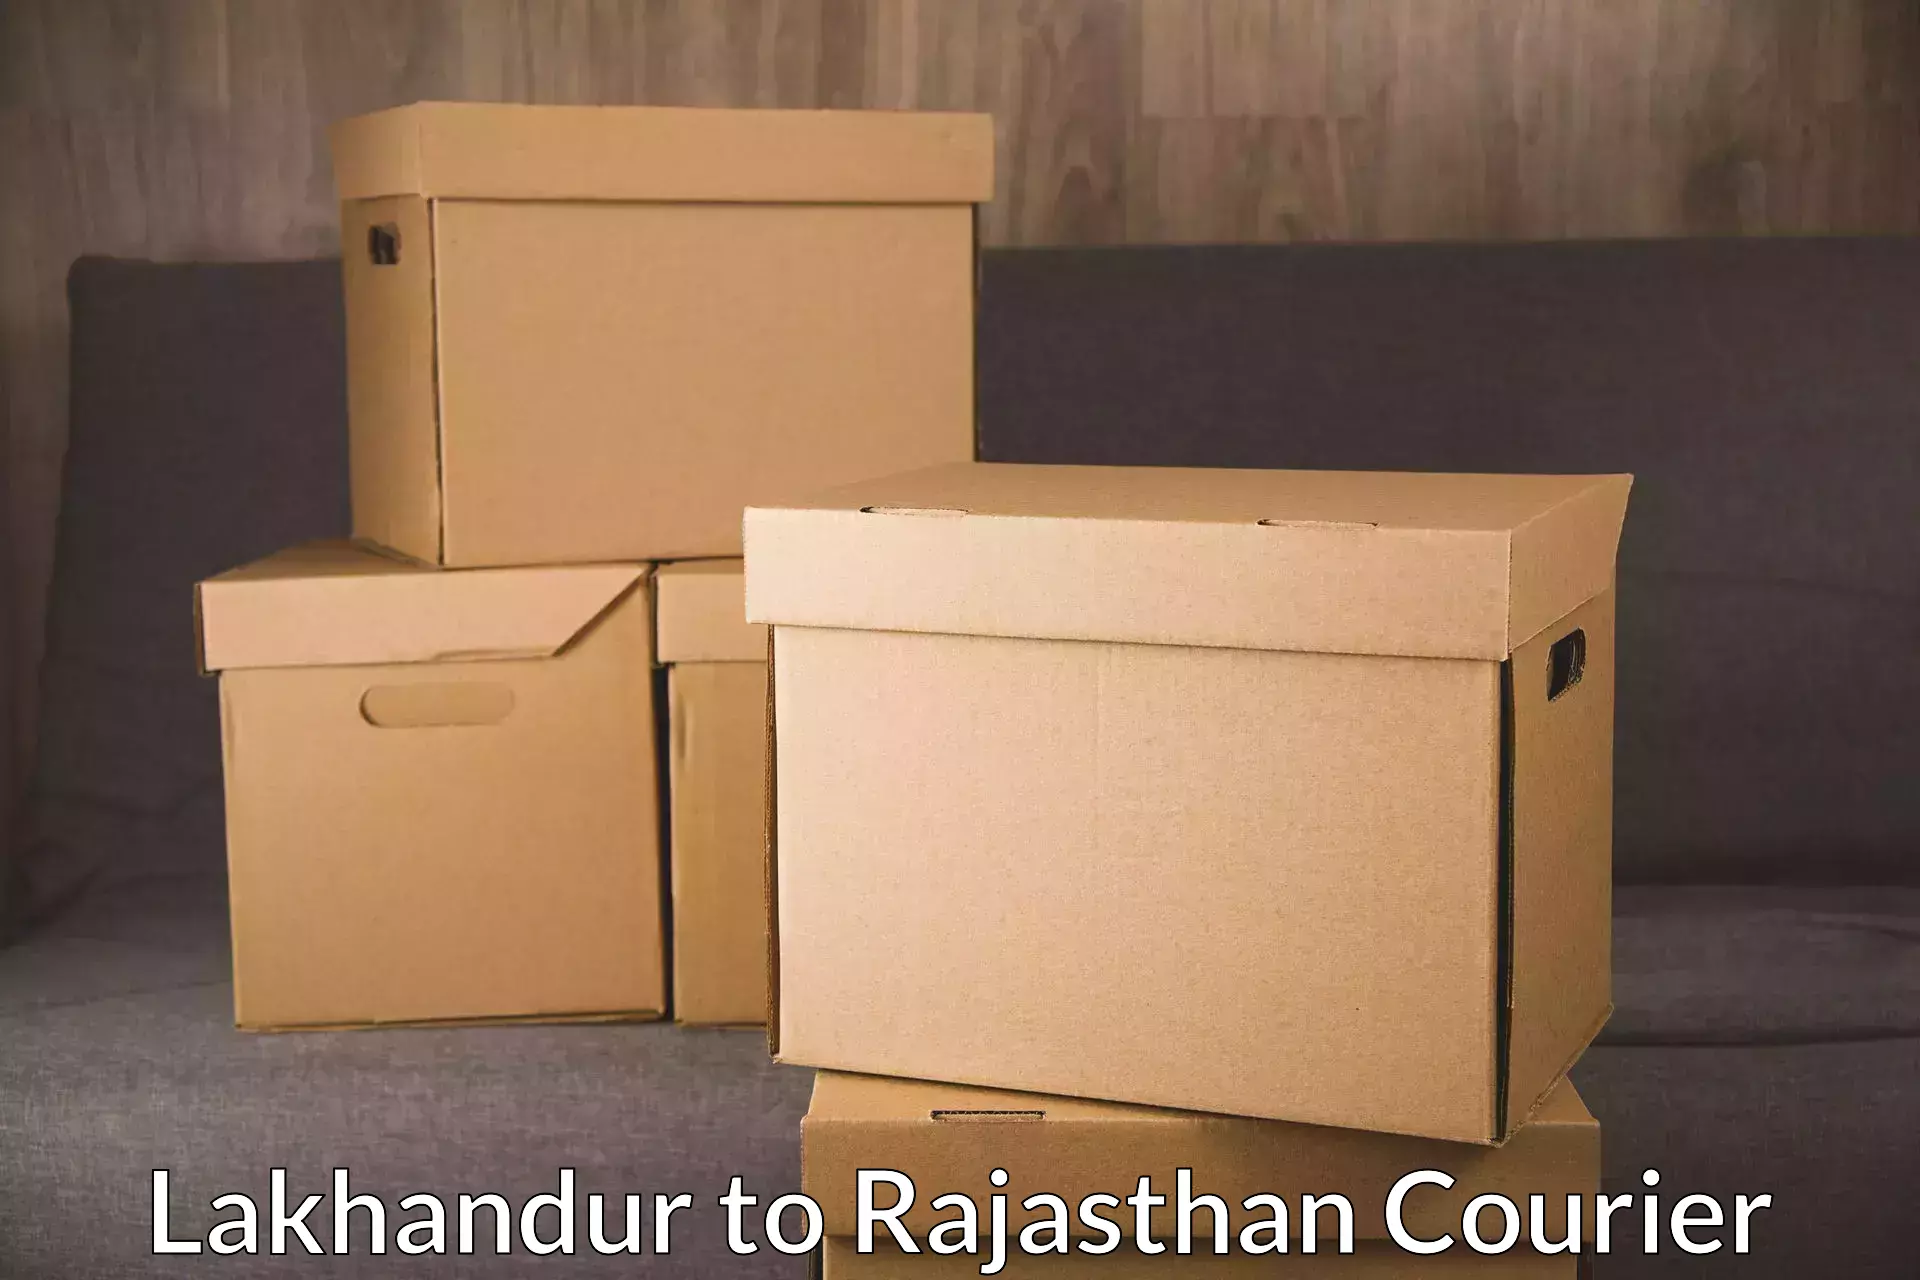 Courier app Lakhandur to Rajasthan